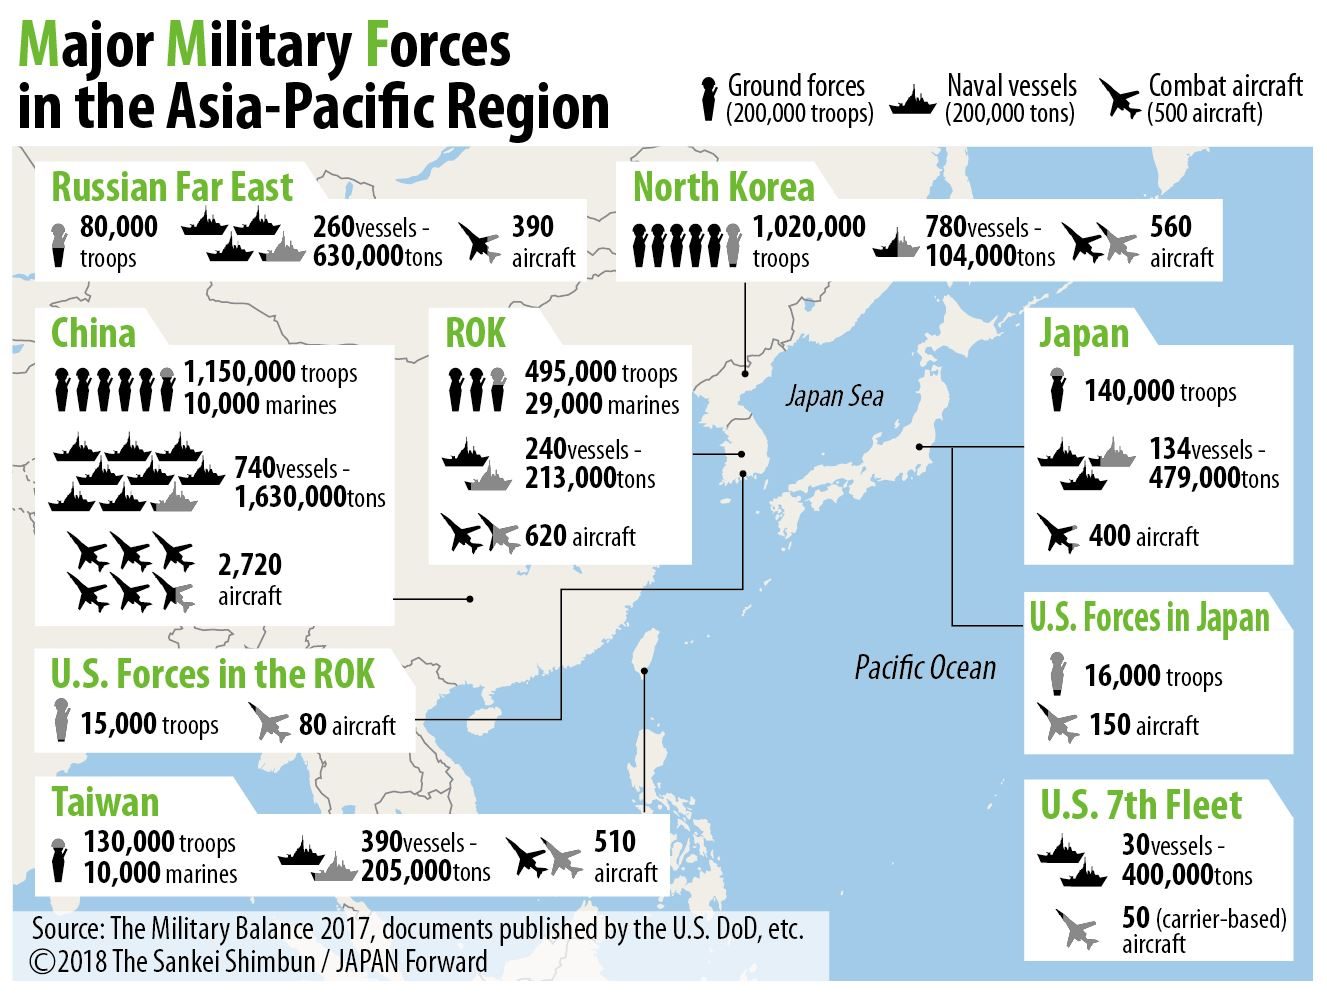 Major Military Forces in the Asia-Pacific Region